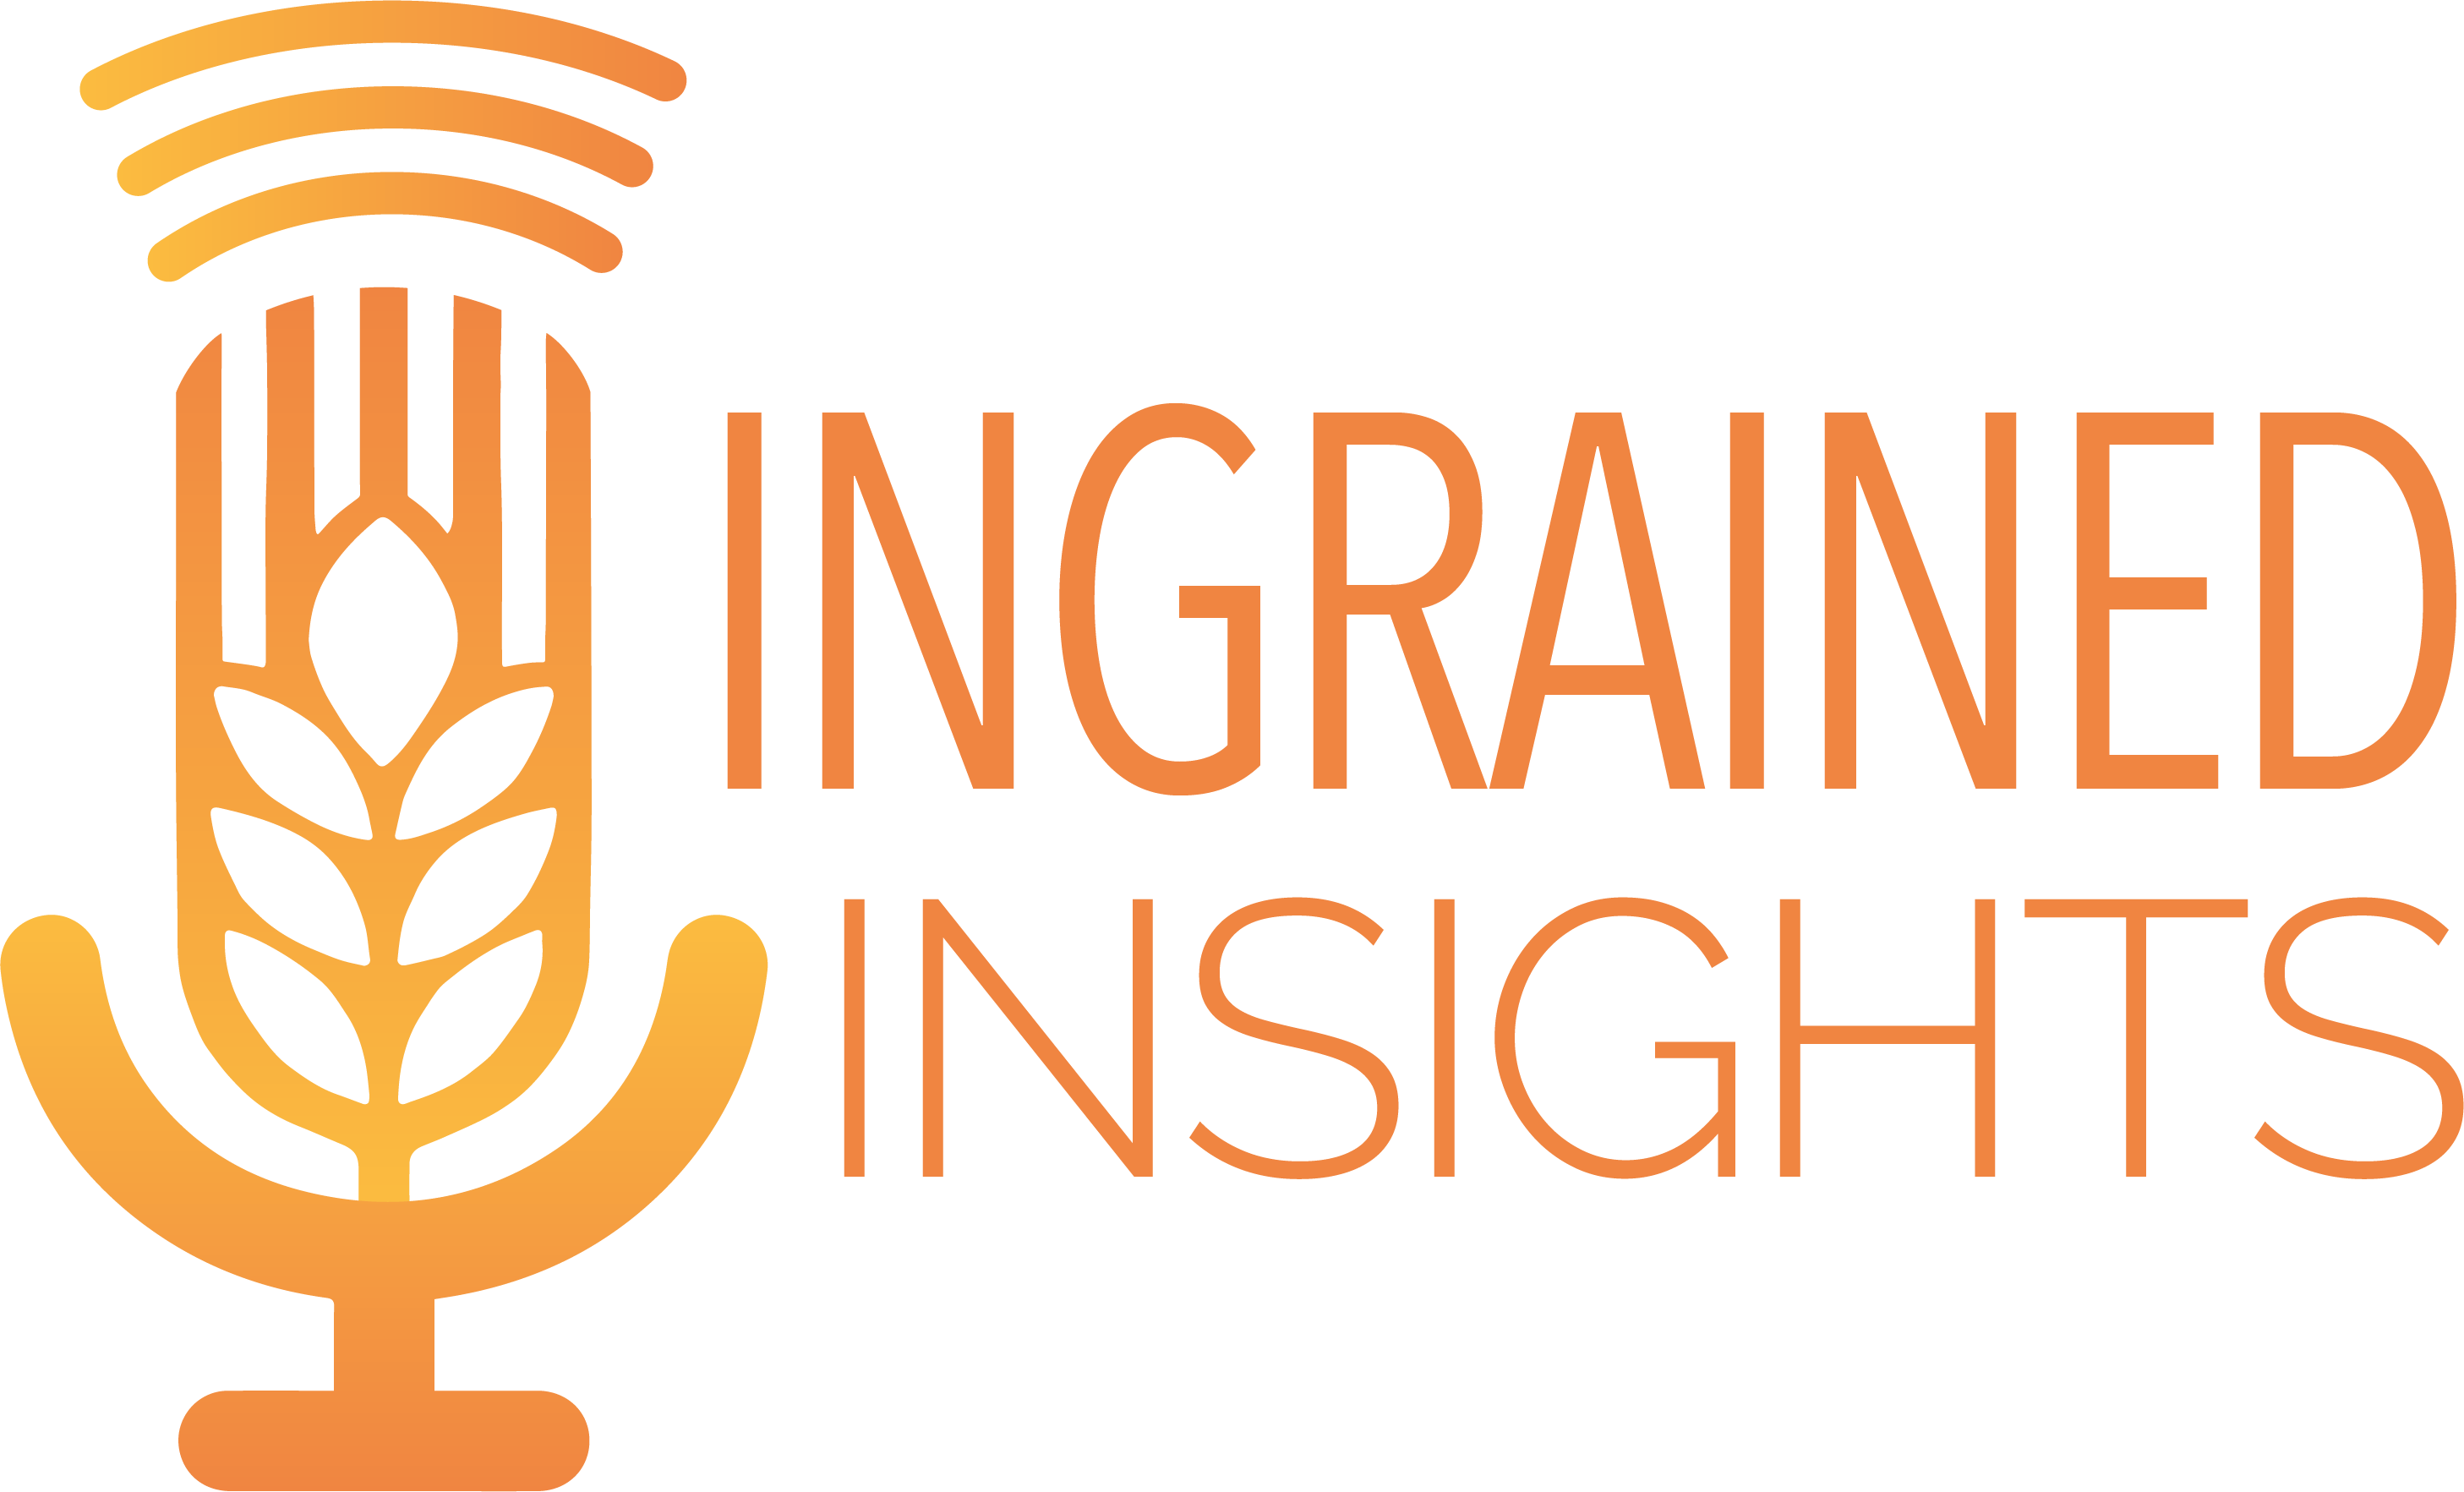 Ingrained insights Podcast Logo